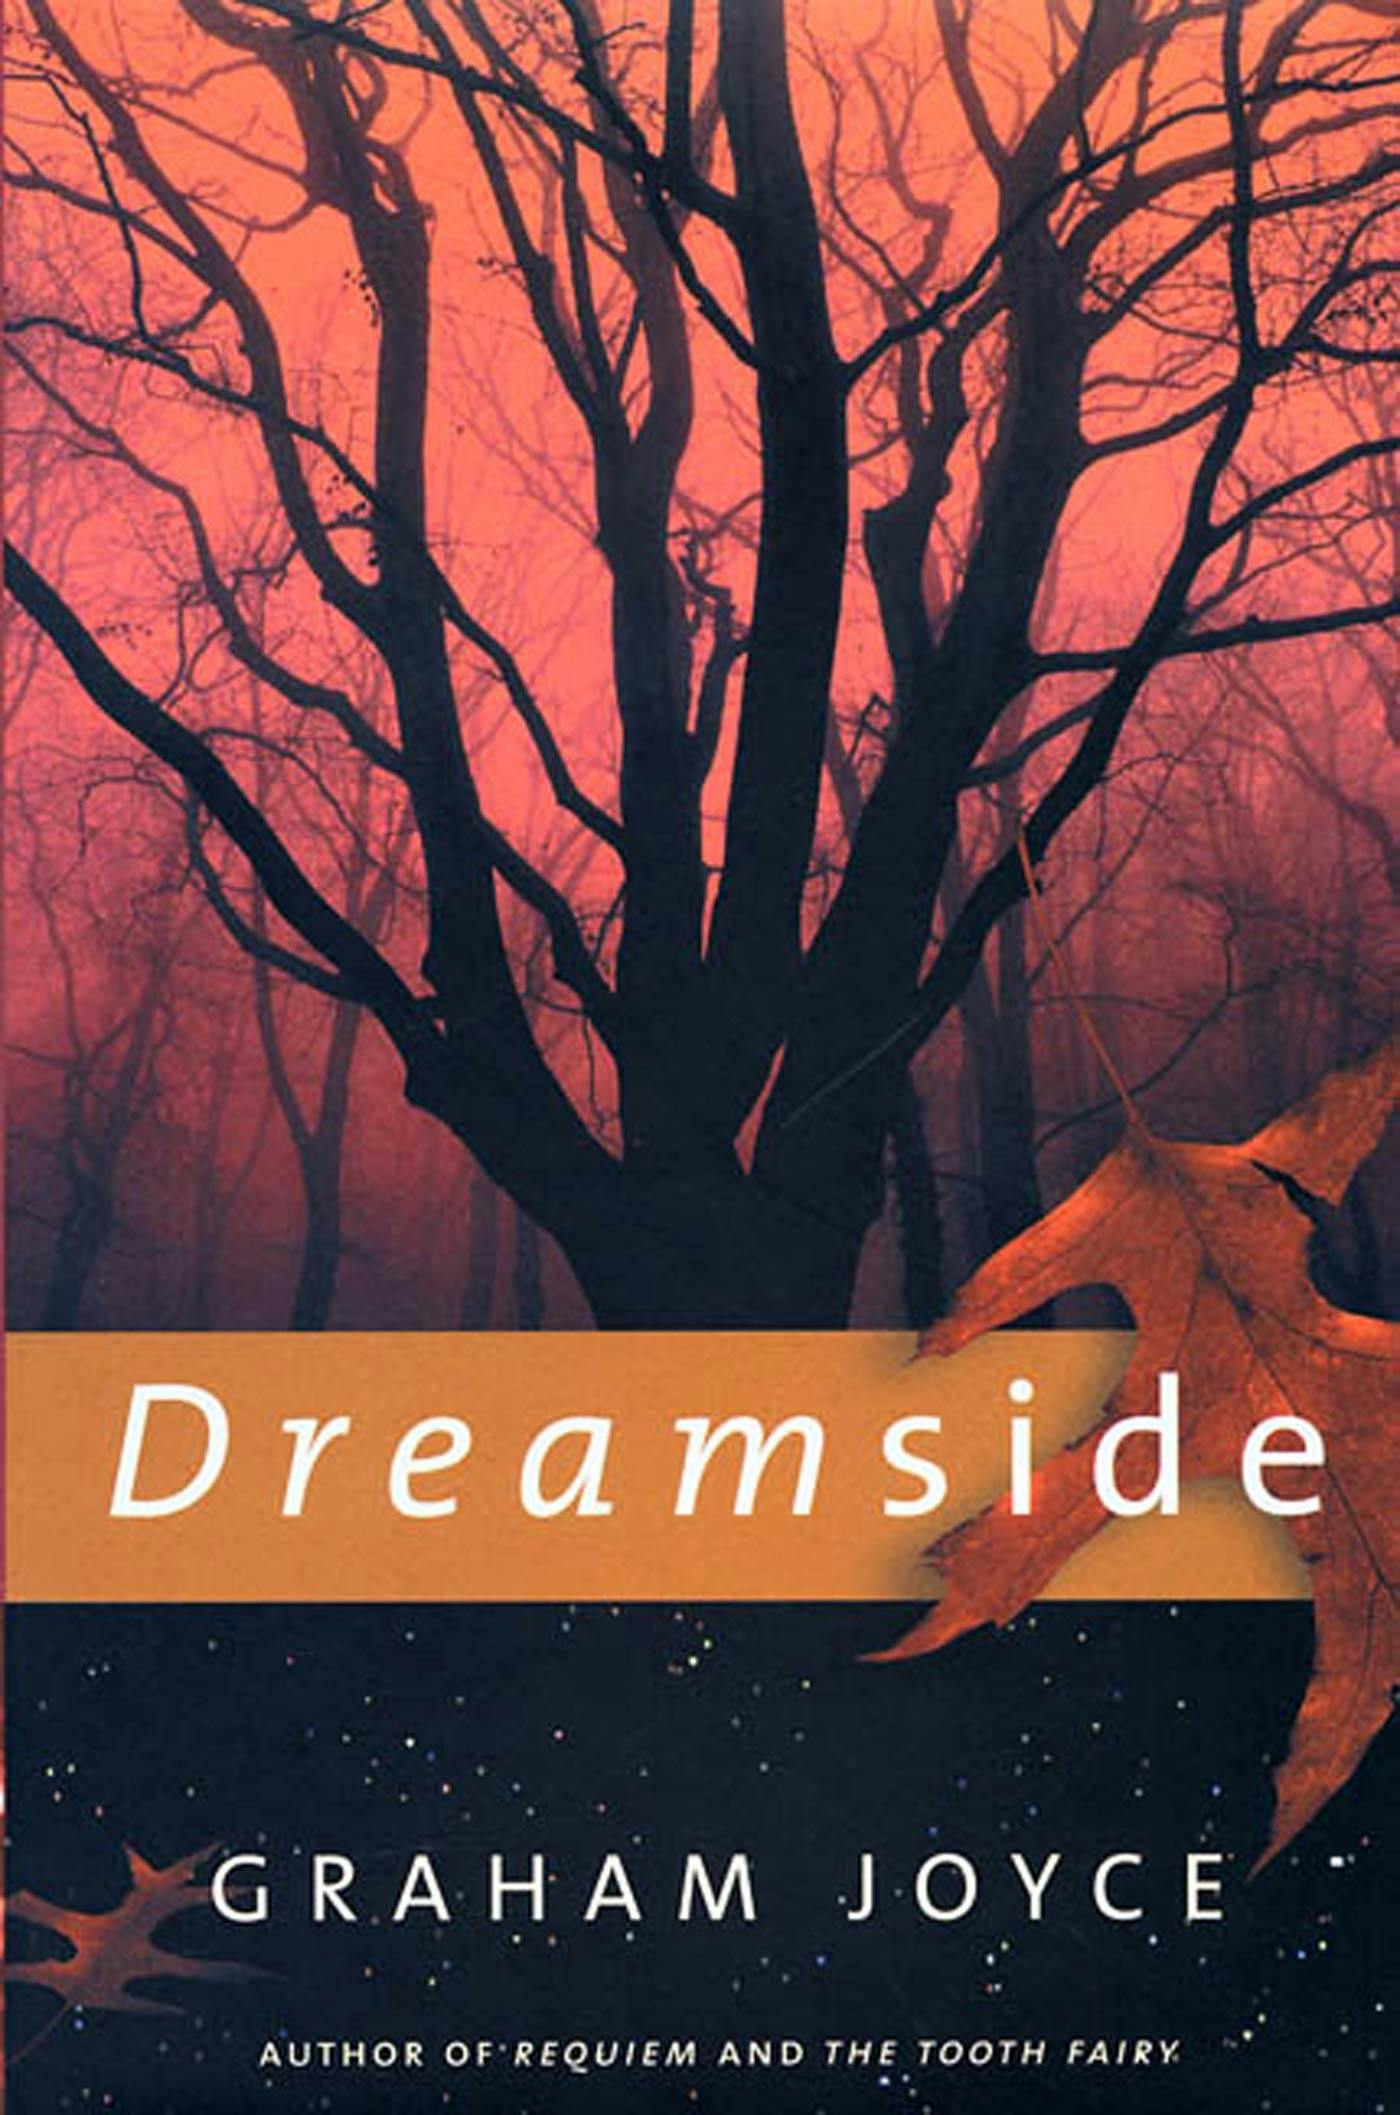 Cover for the book titled as: Dreamside